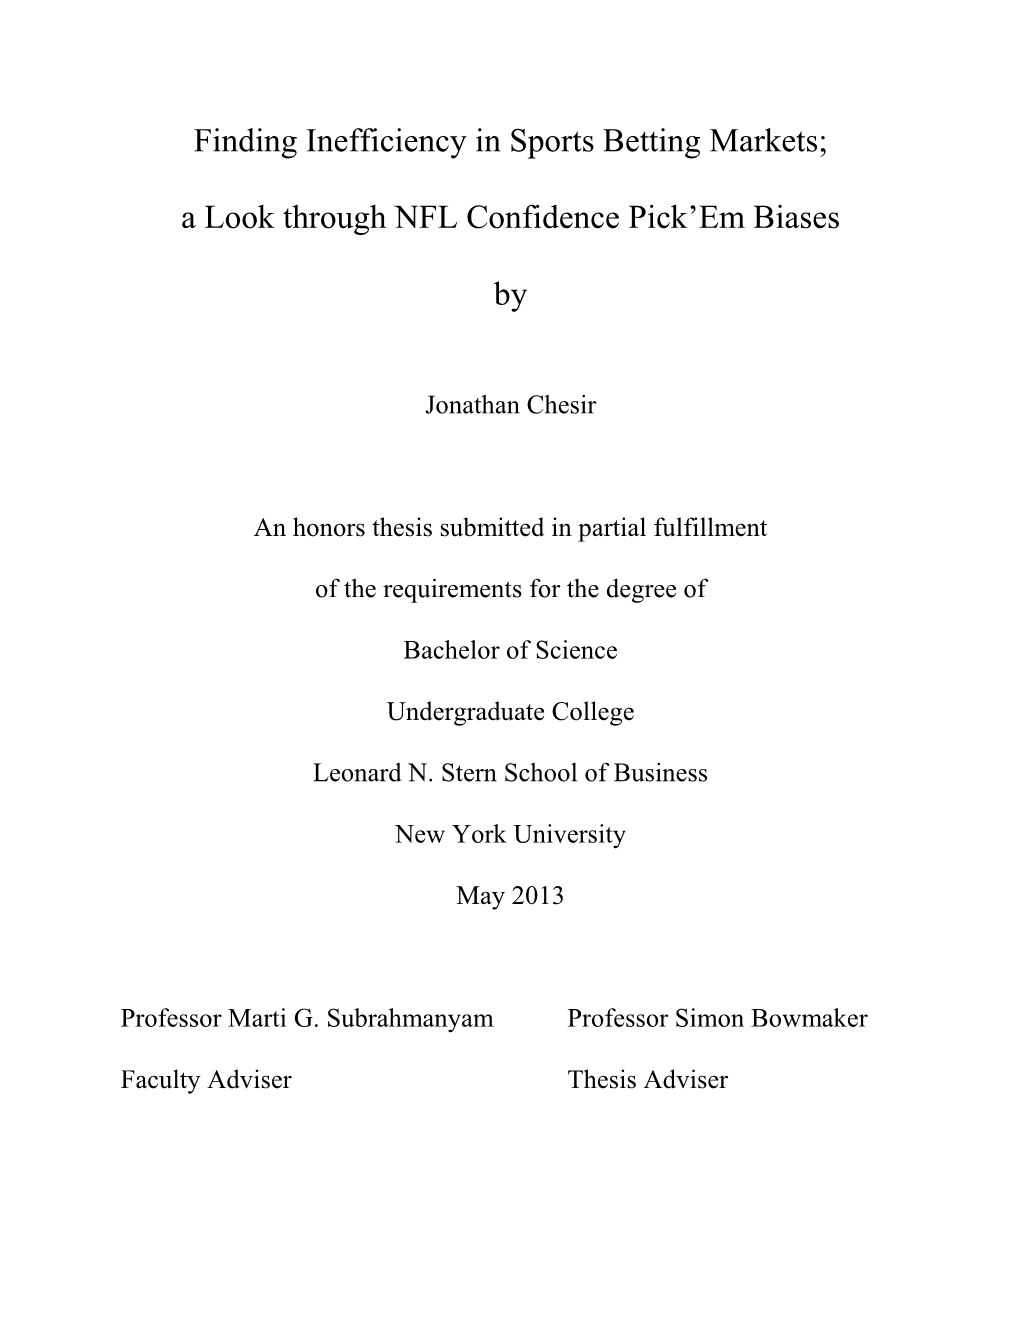 Finding Inefficiency in Sports Betting Markets; a Look Through NFL Confidence Pick'em Biases By